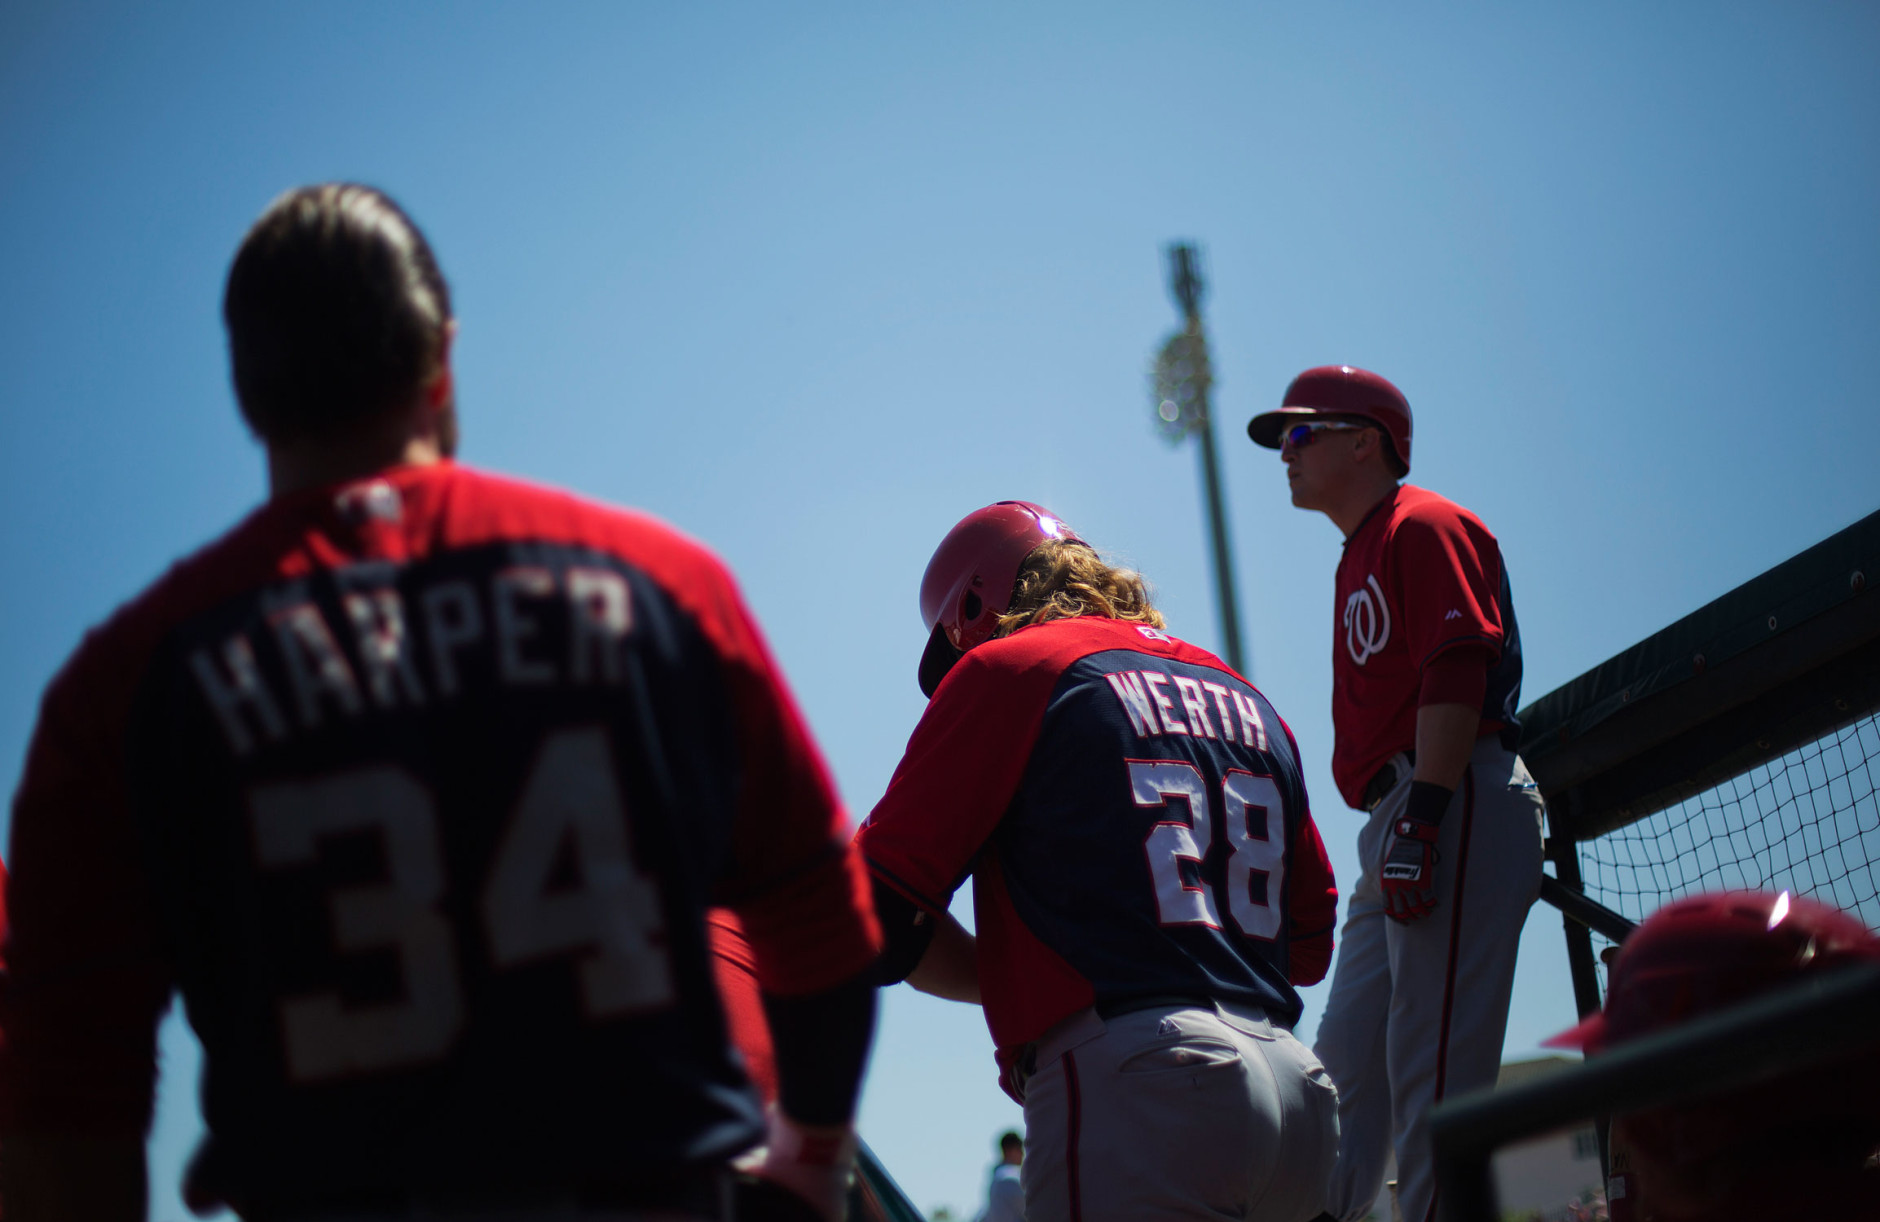 Nationals pitchers and catchers report to Spring Training in just 15 days. (AP Photo/David Goldman)